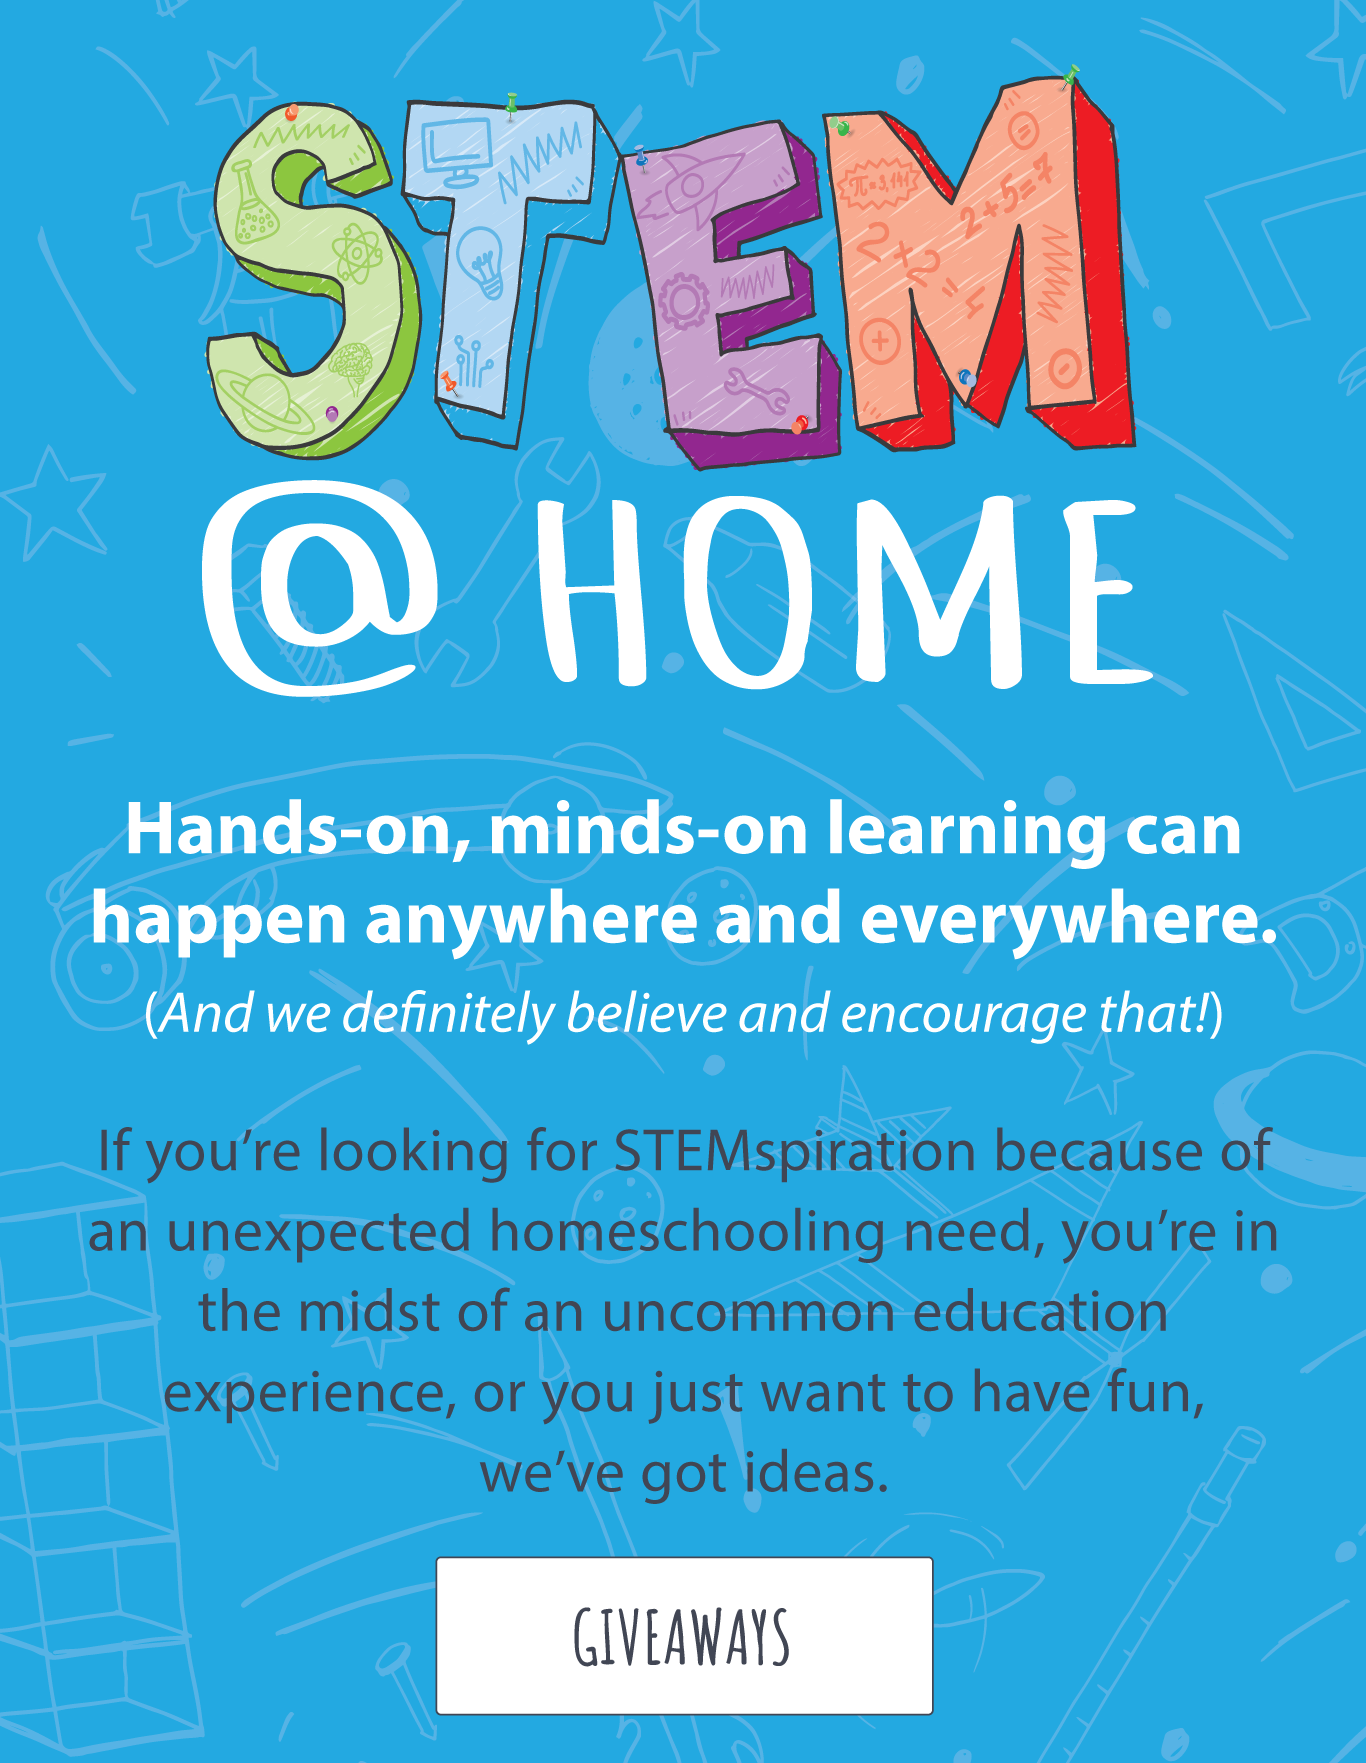 STEM @ HOME – Hands-on, minds-on learning can happen anywhere and everywhere. (And we definitely believe and encourage that!) If you’re looking for STEMspiration because of an unexpected homeschooling need, you’re in the midst of an uncommon education experience, or you just want to have fun, we’ve got ideas.